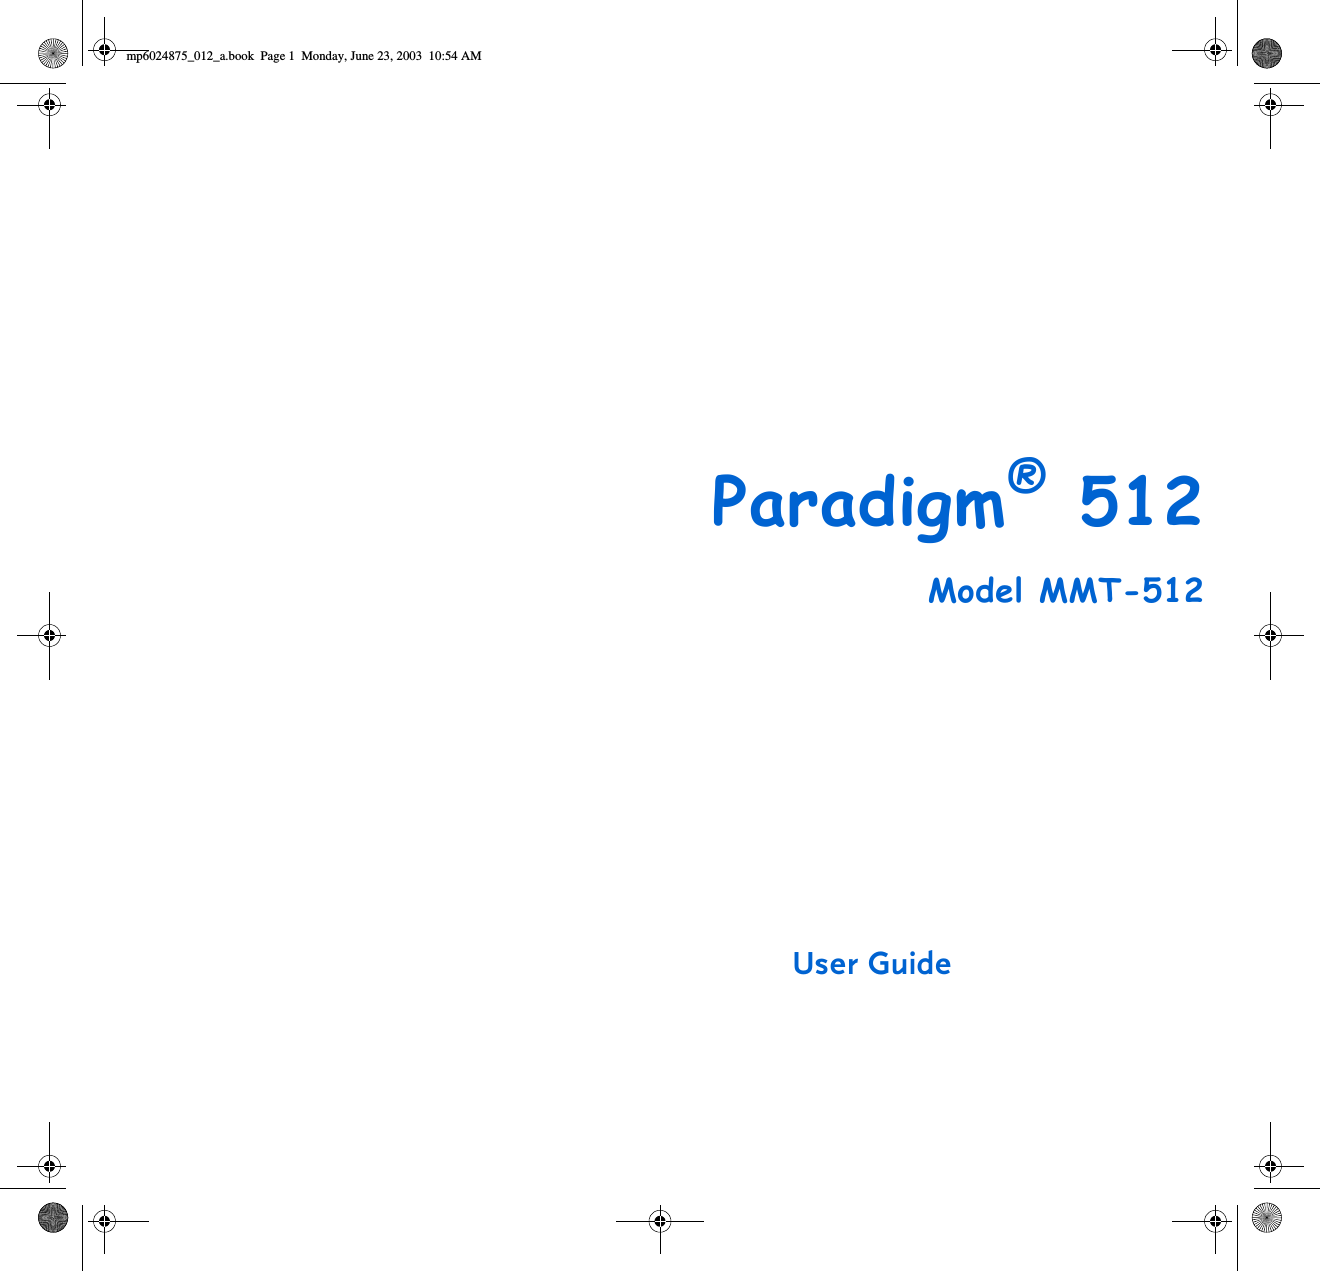 Paradigm® 512Model MMT-512User Guidemp6024875_012_a.book  Page 1  Monday, June 23, 2003  10:54 AM